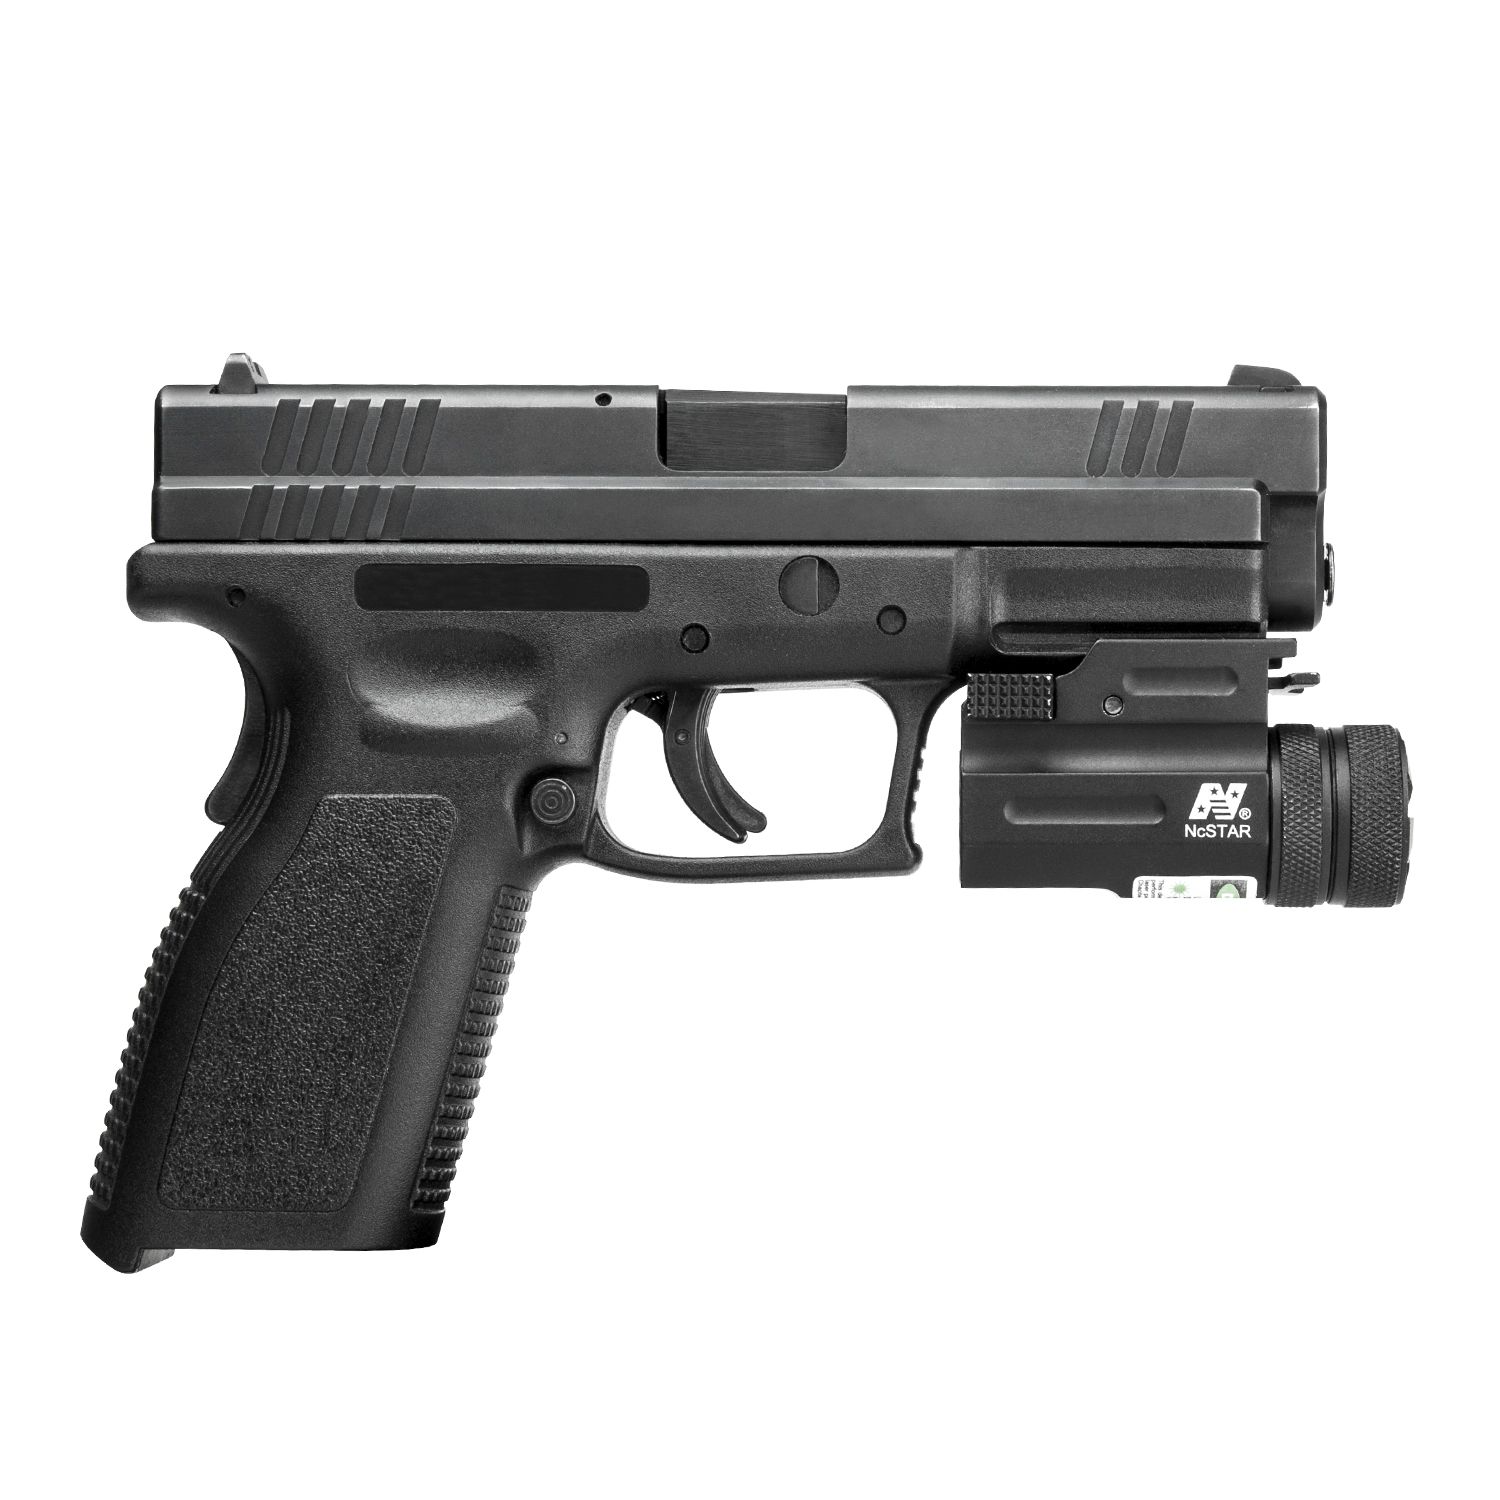 Ultra COMPACT Green Laser Sight with Quick Release Picatinny Rail for Pistol 